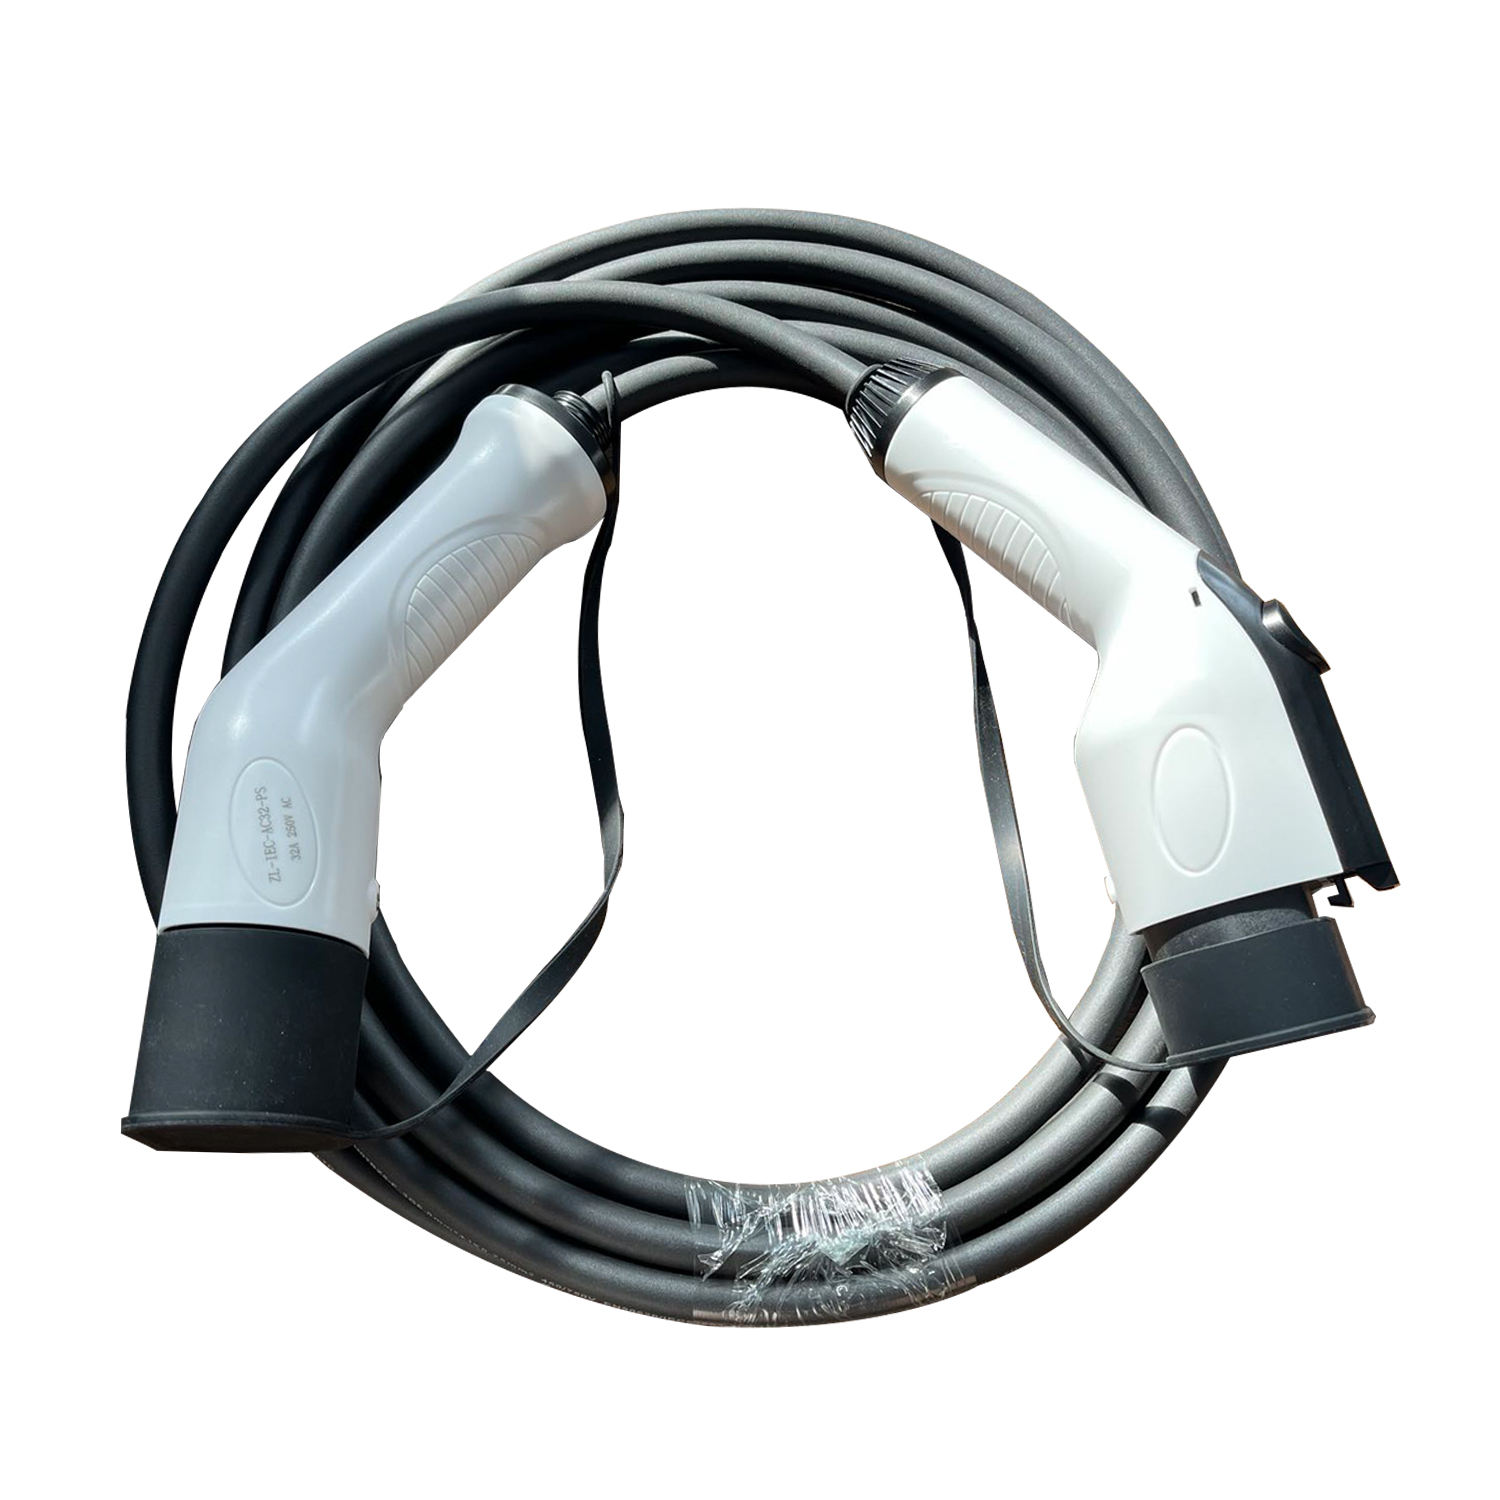 3.5kw 7kw 16A 32A Type 2 To GB/T Electric Vehicle Ev Charging Cable with 5m